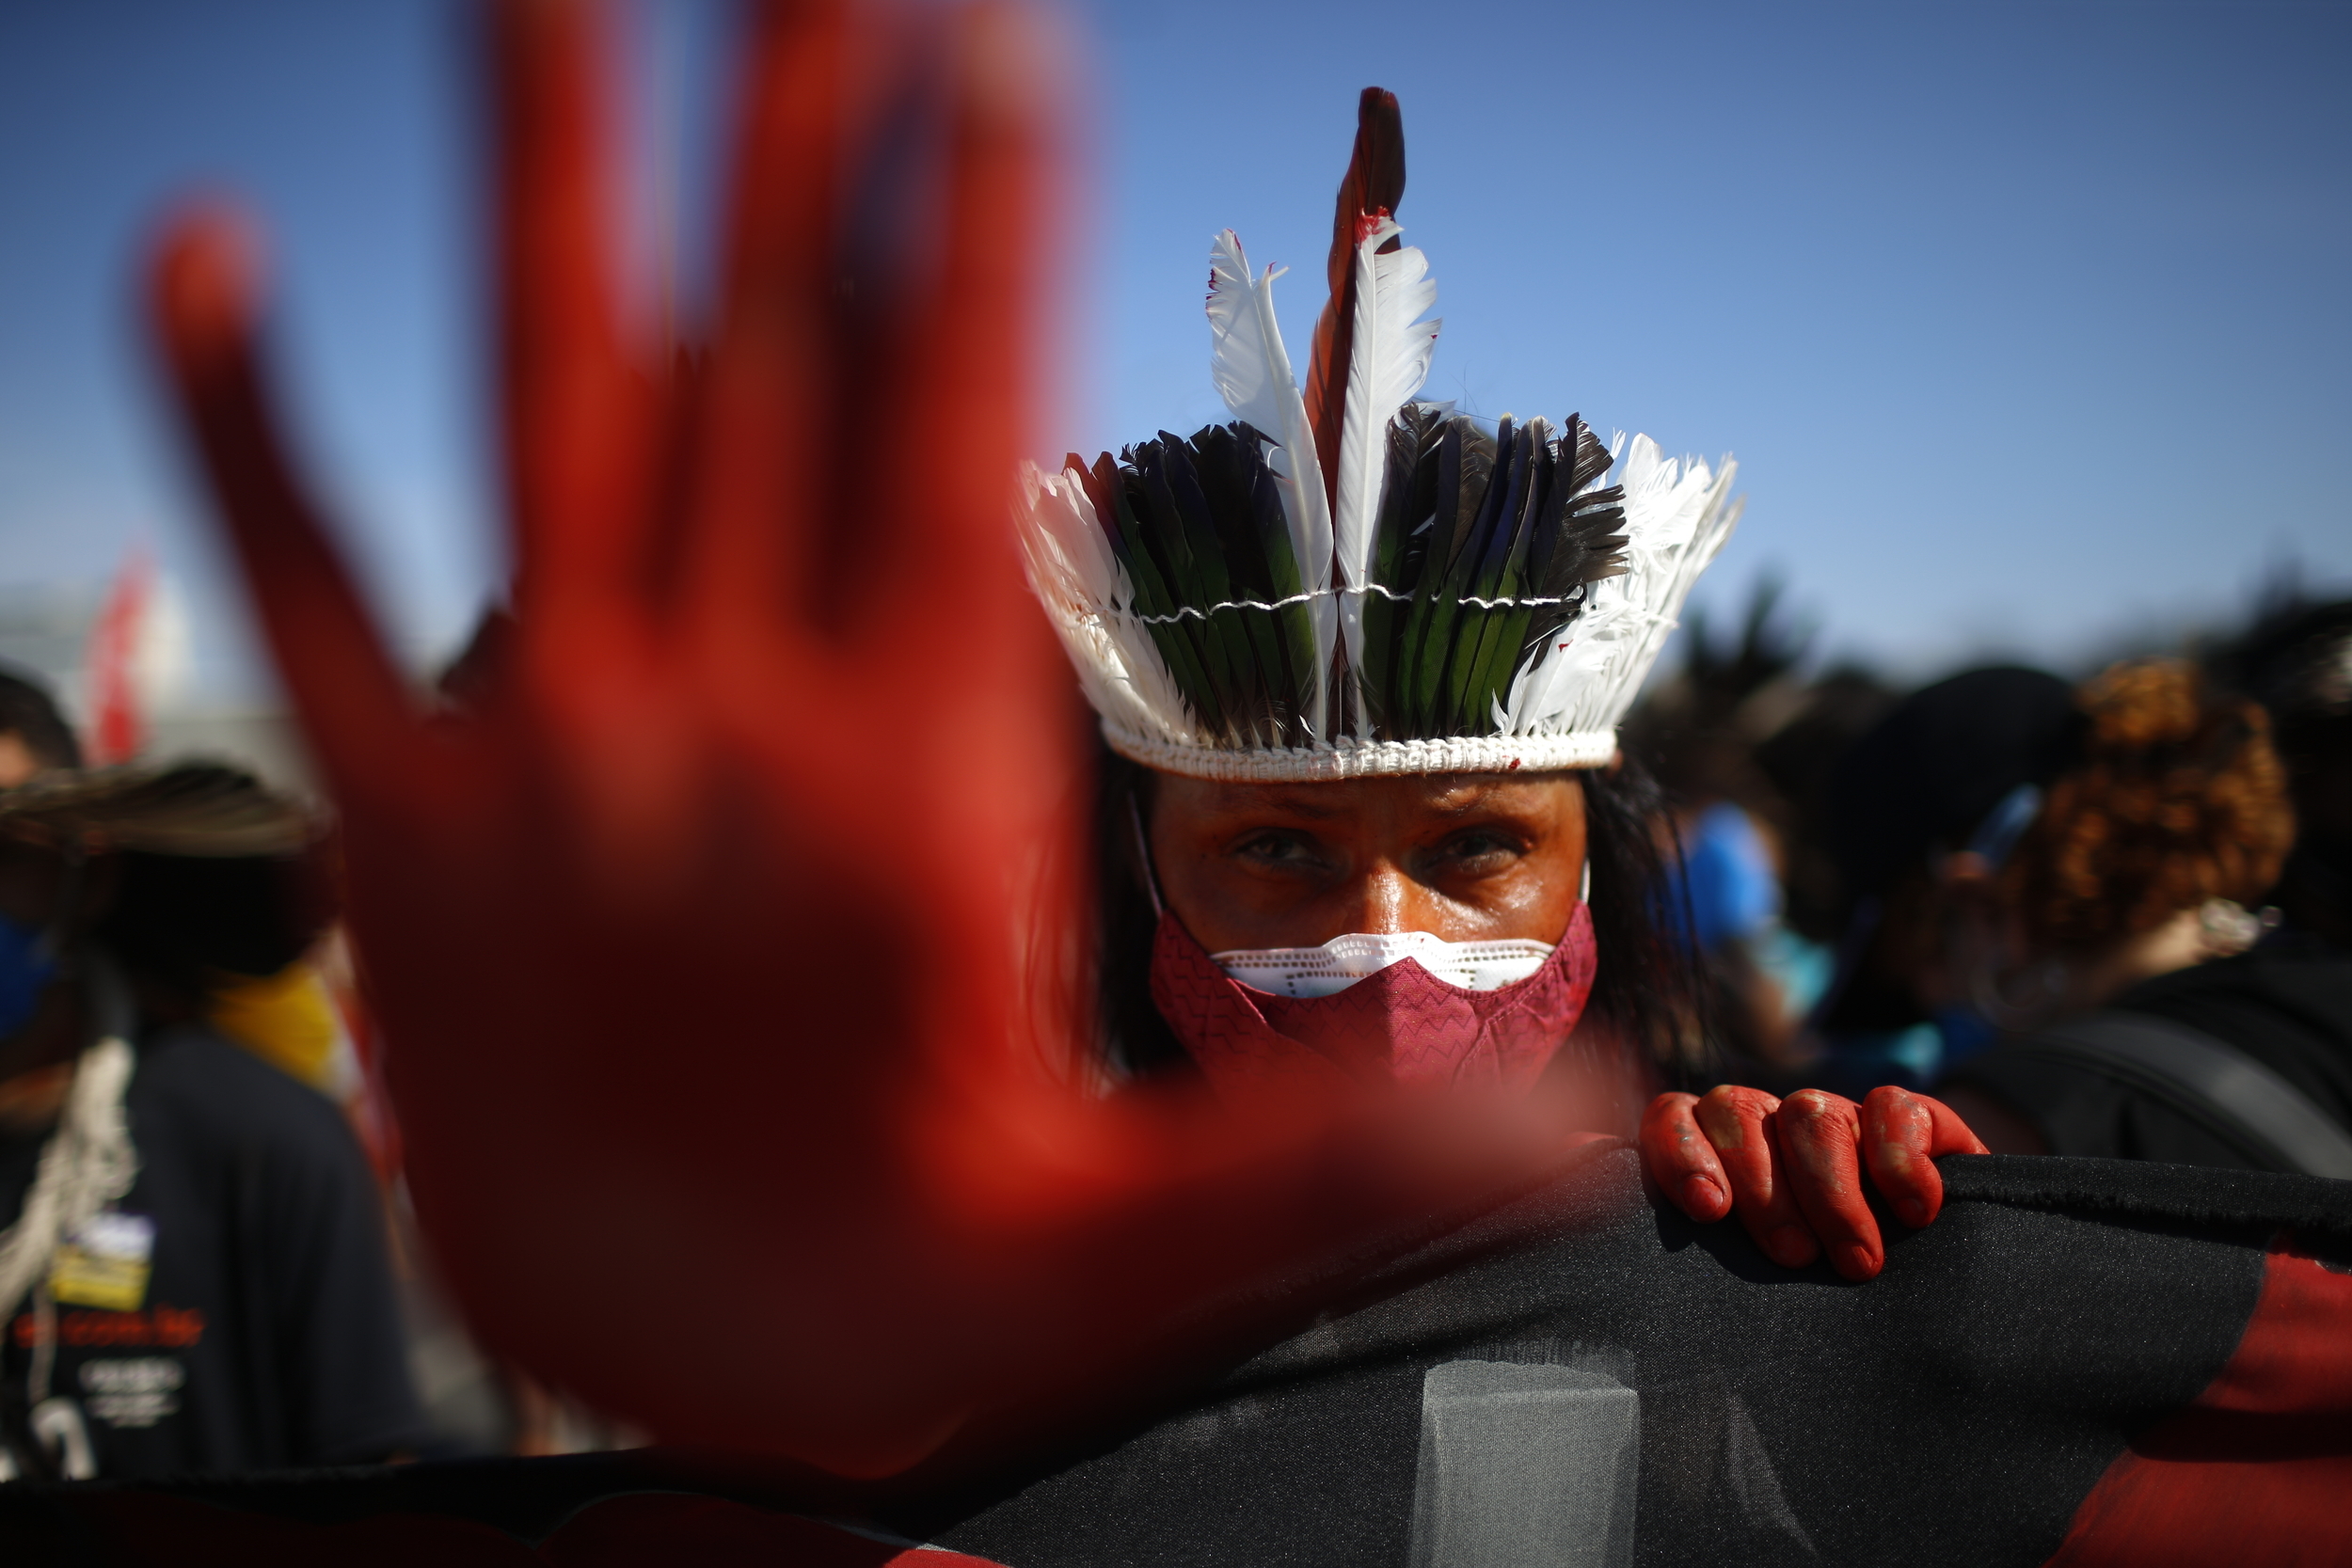 An Indigenous person in a traditional feather headdress and face paint holds a red-painted open palm up close to the camera.